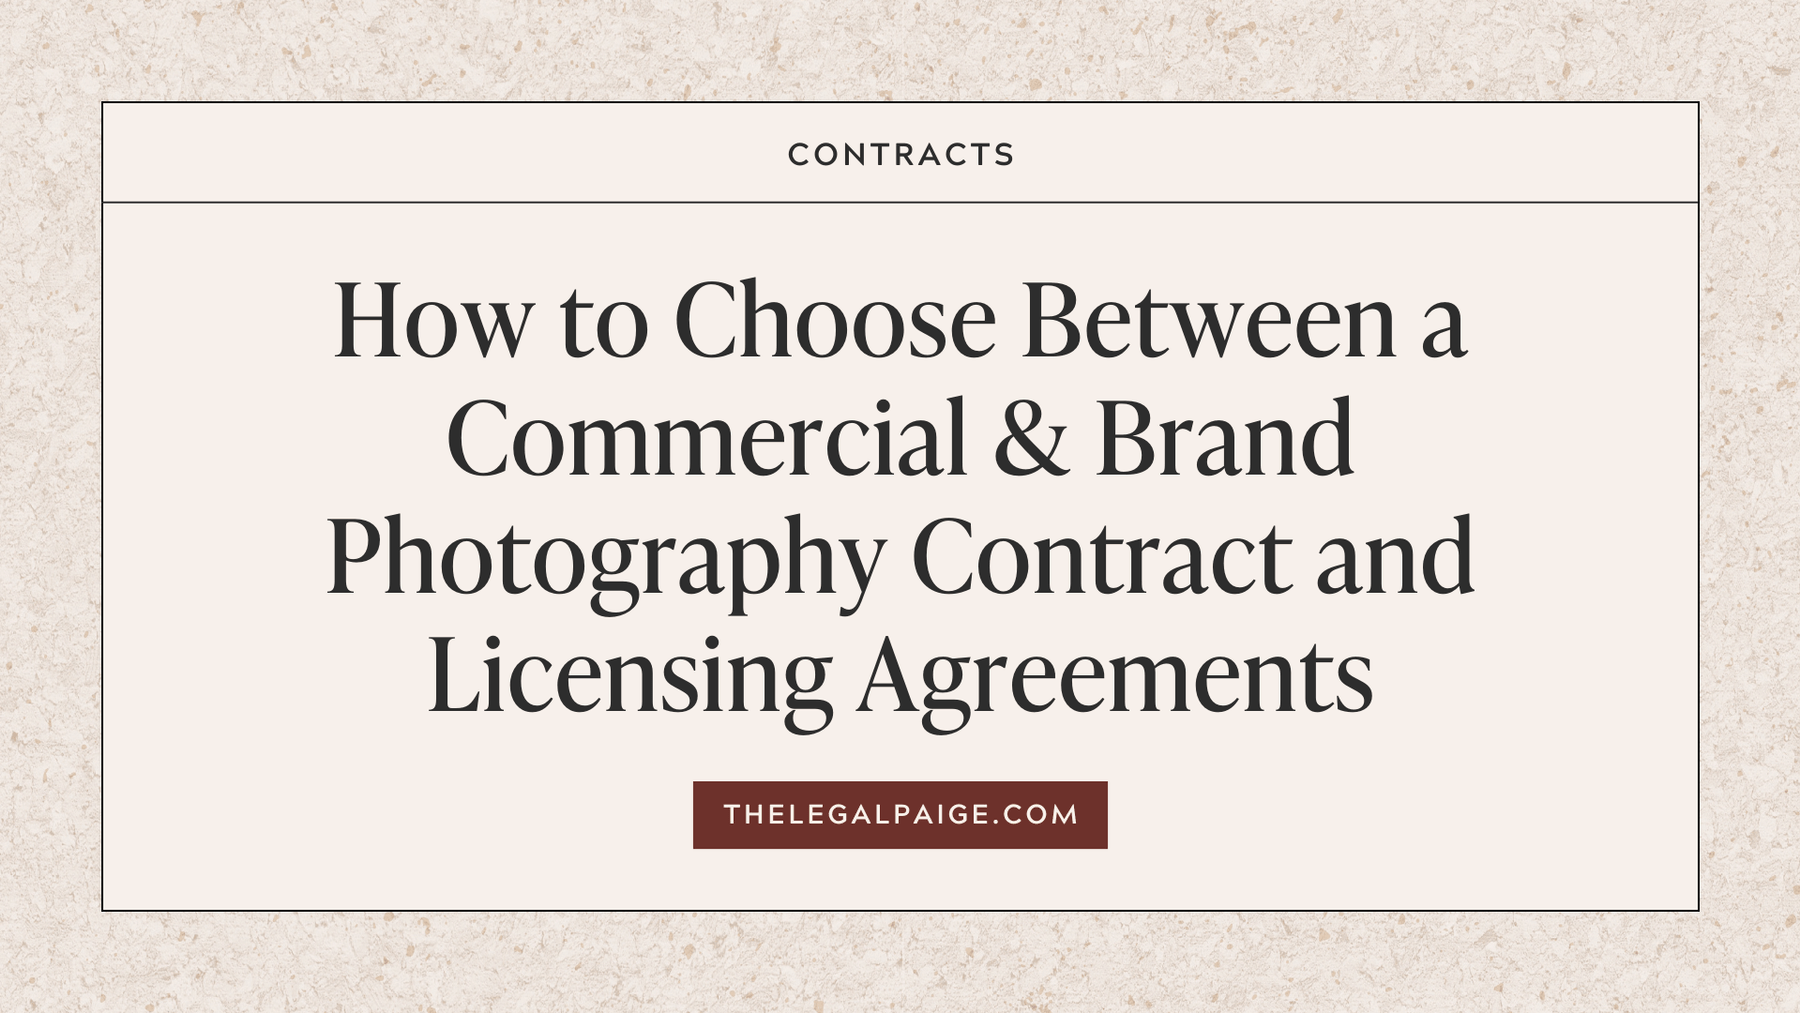 Commercial Photo Contract vs Licensing Agreement (royalty fees)